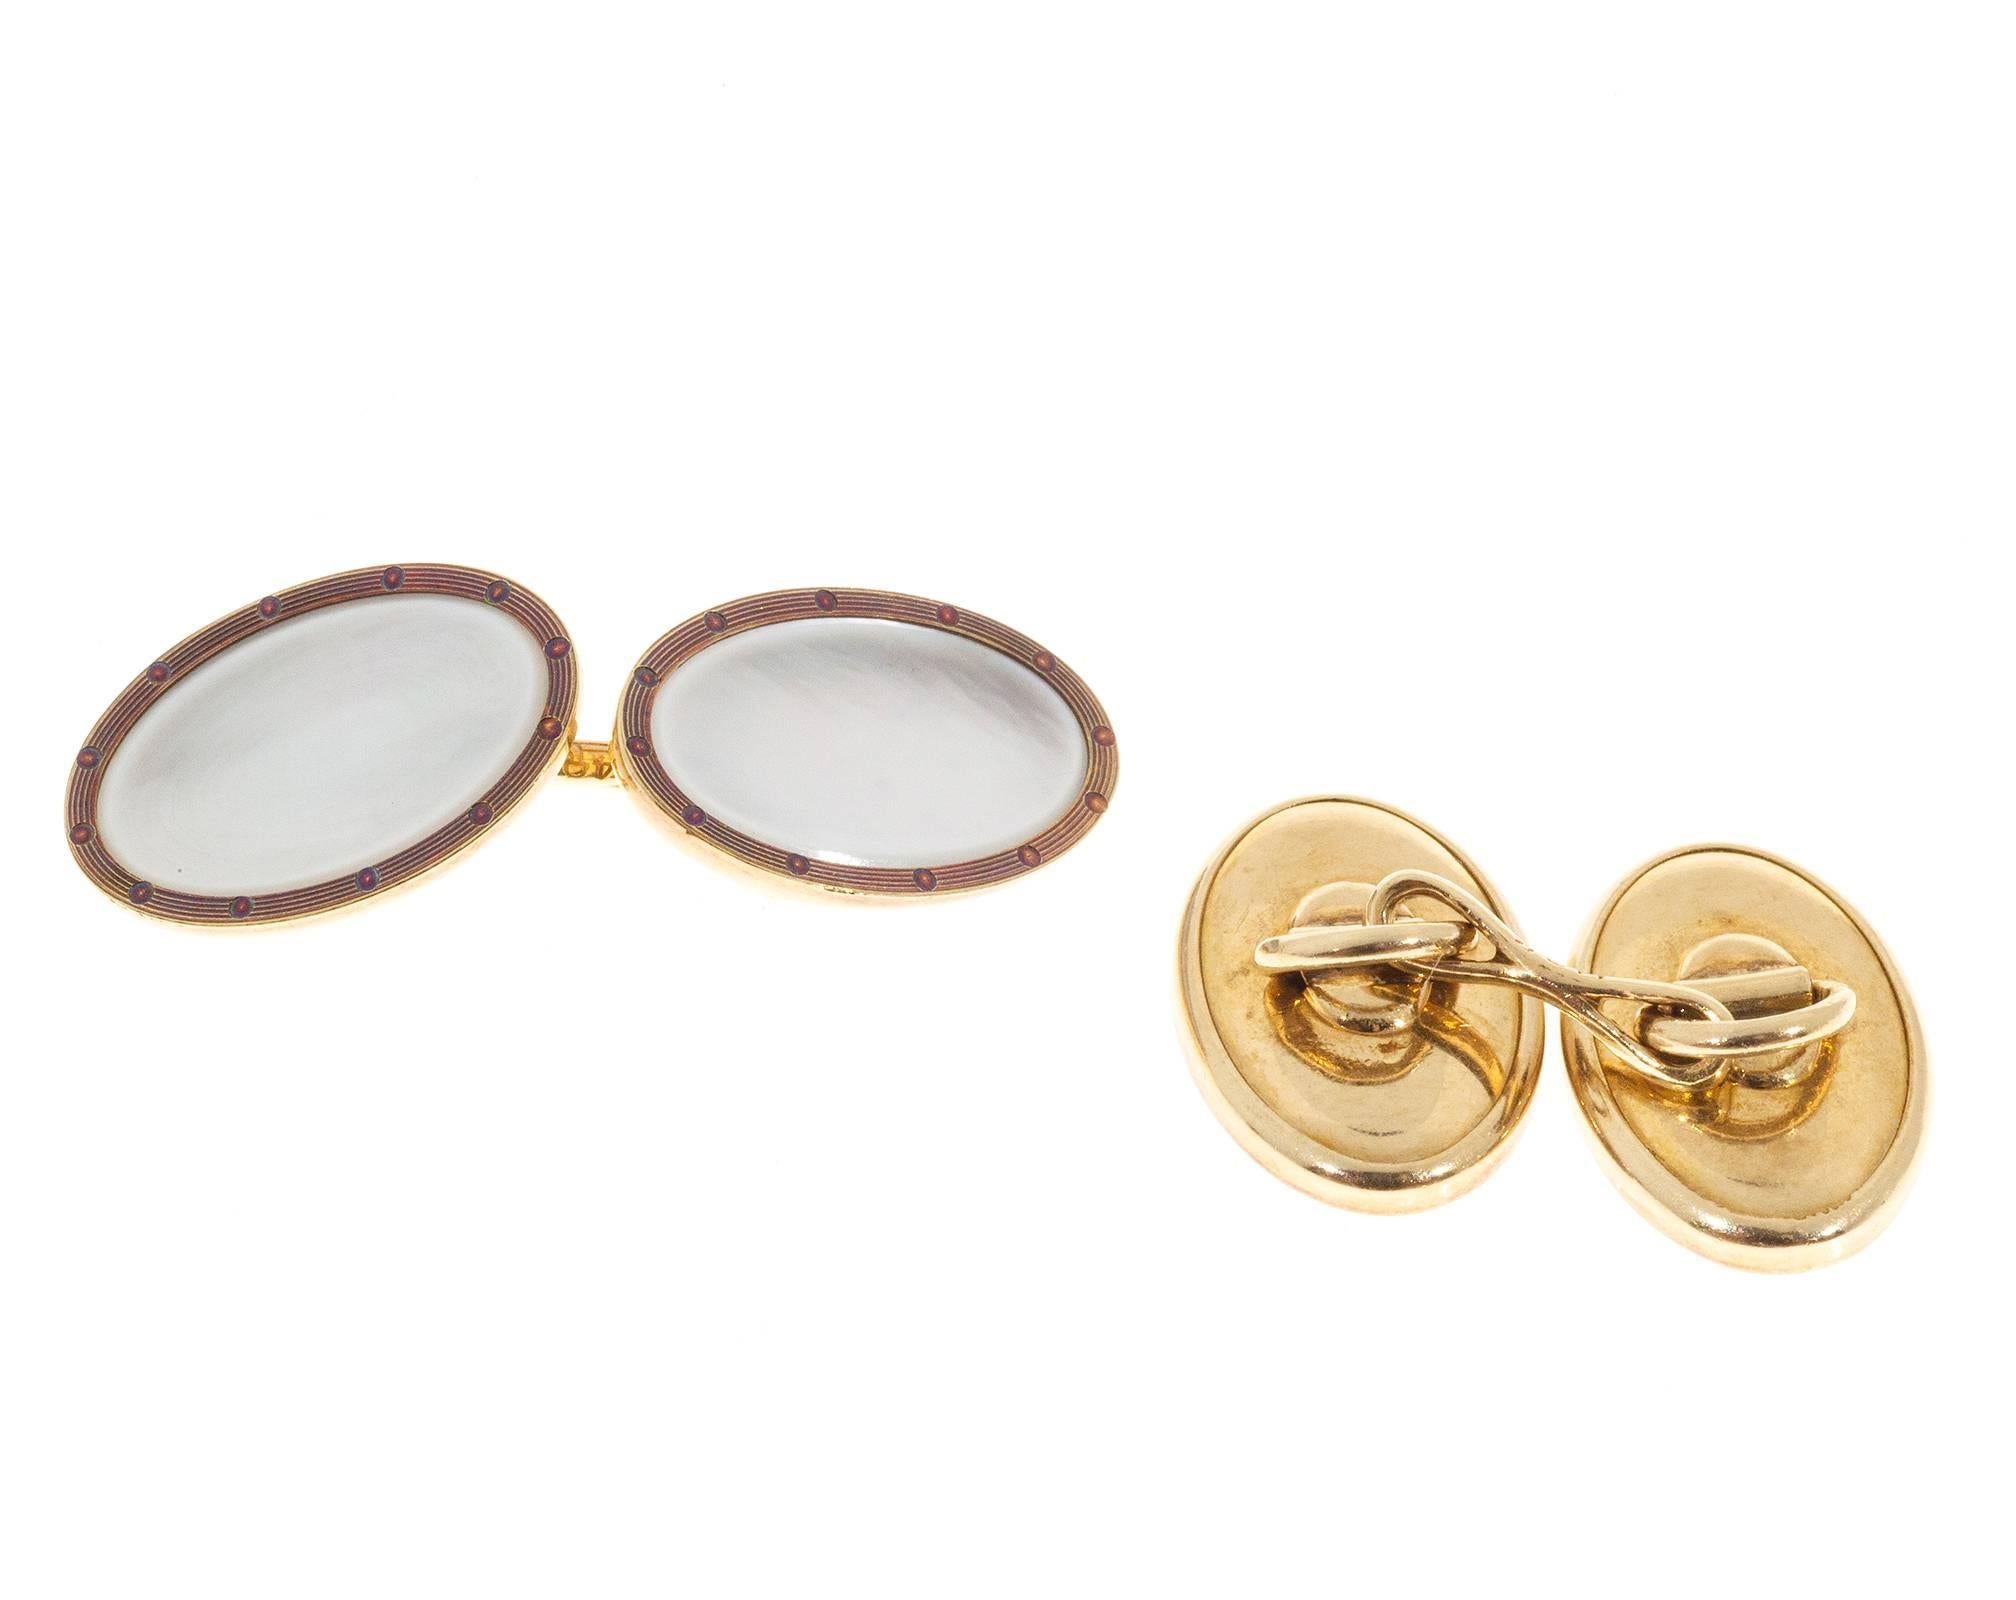  Larter & Sons double sided Mother of Pearl double-sided 14k yellow gold cufflinks circa 1920's

White Mother of Pearl 14.5 x 9mm
14k Yellow Gold
Stamped: 14k
Larter hallmark
Oval shape 16.47 x 11mm or .64 x .43 inches
Double sided 6.3 grams
